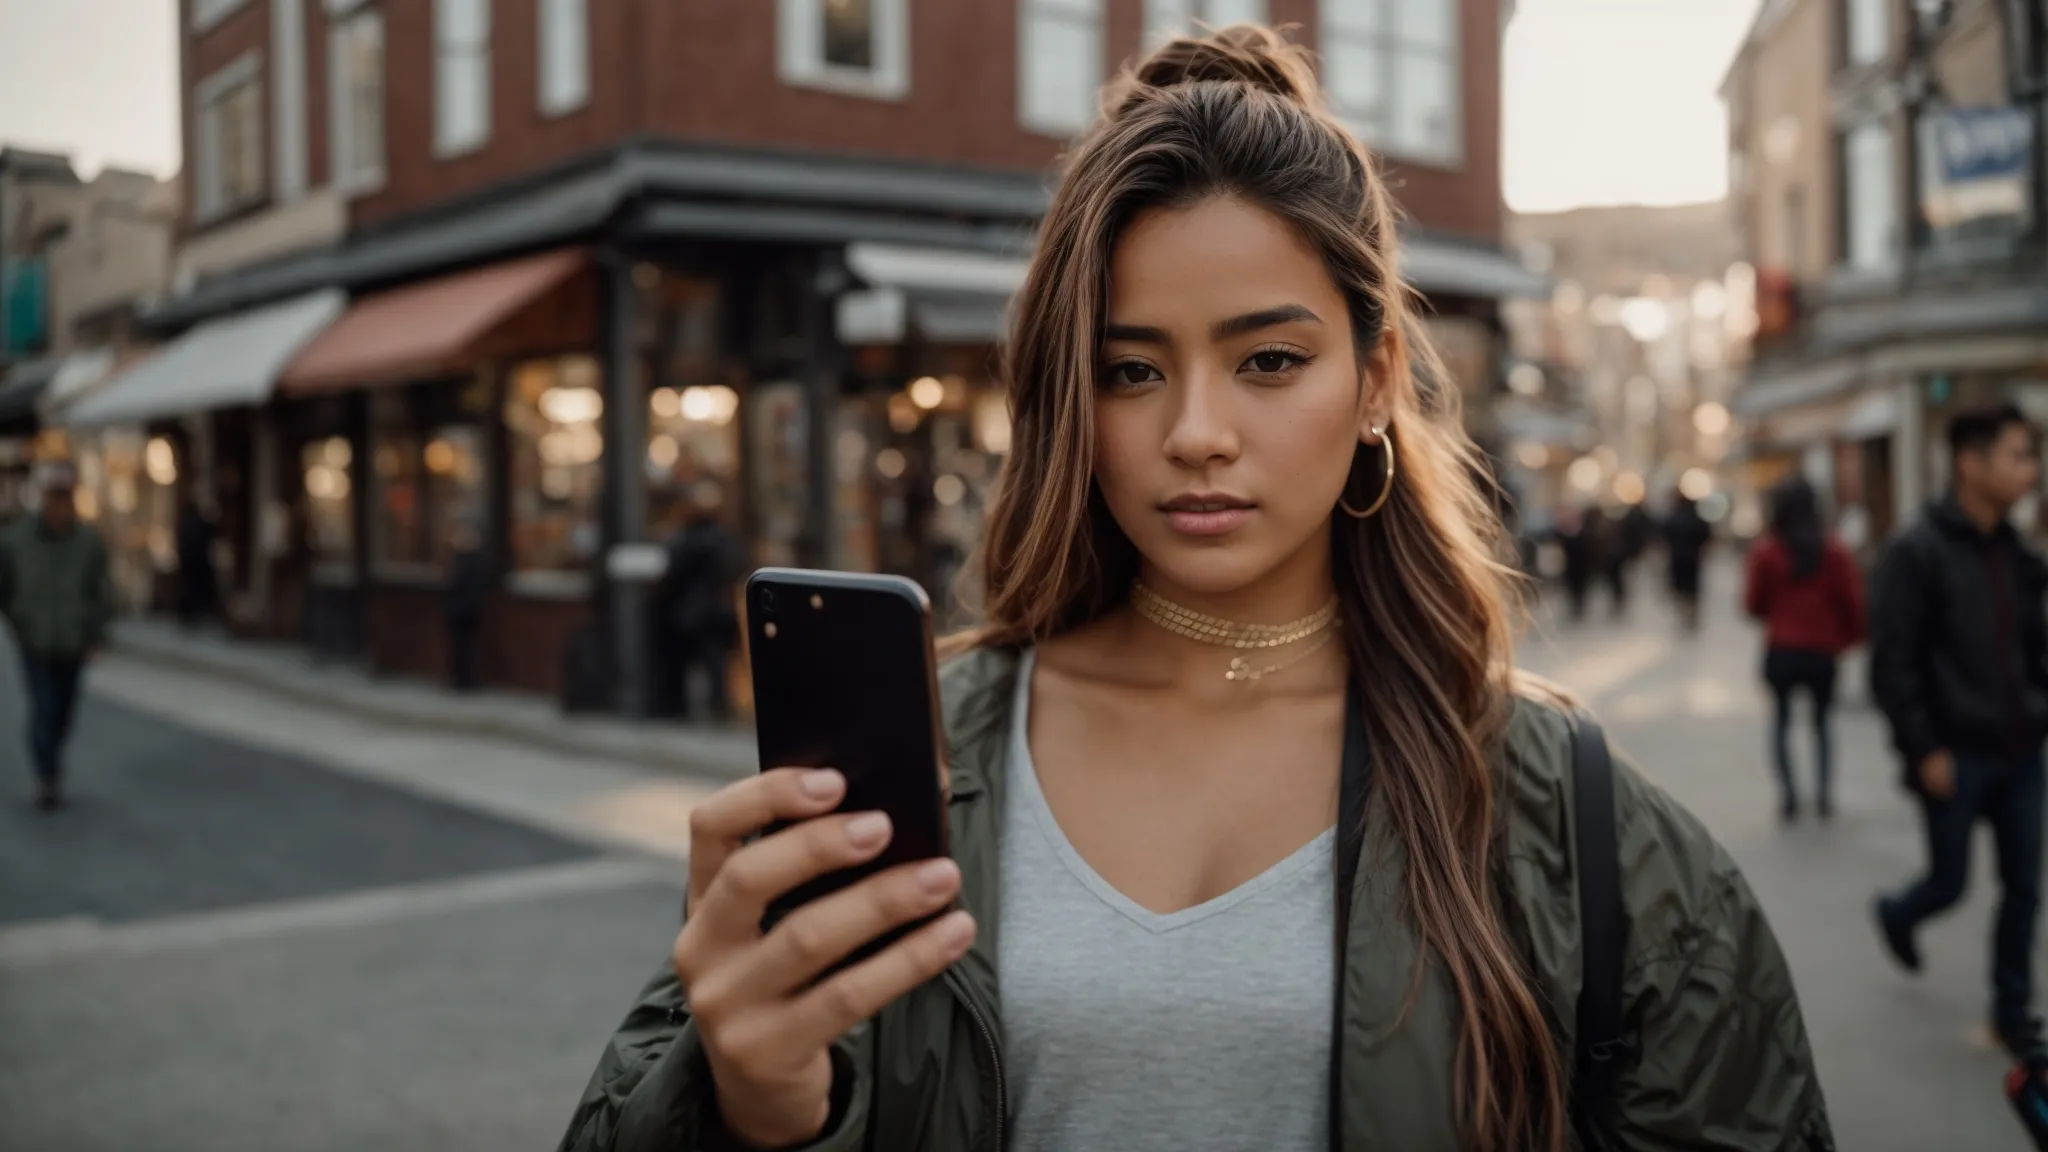 a local influencer holding a smartphone takes a selfie on a bustling city street corner, with small local business storefronts in the background.